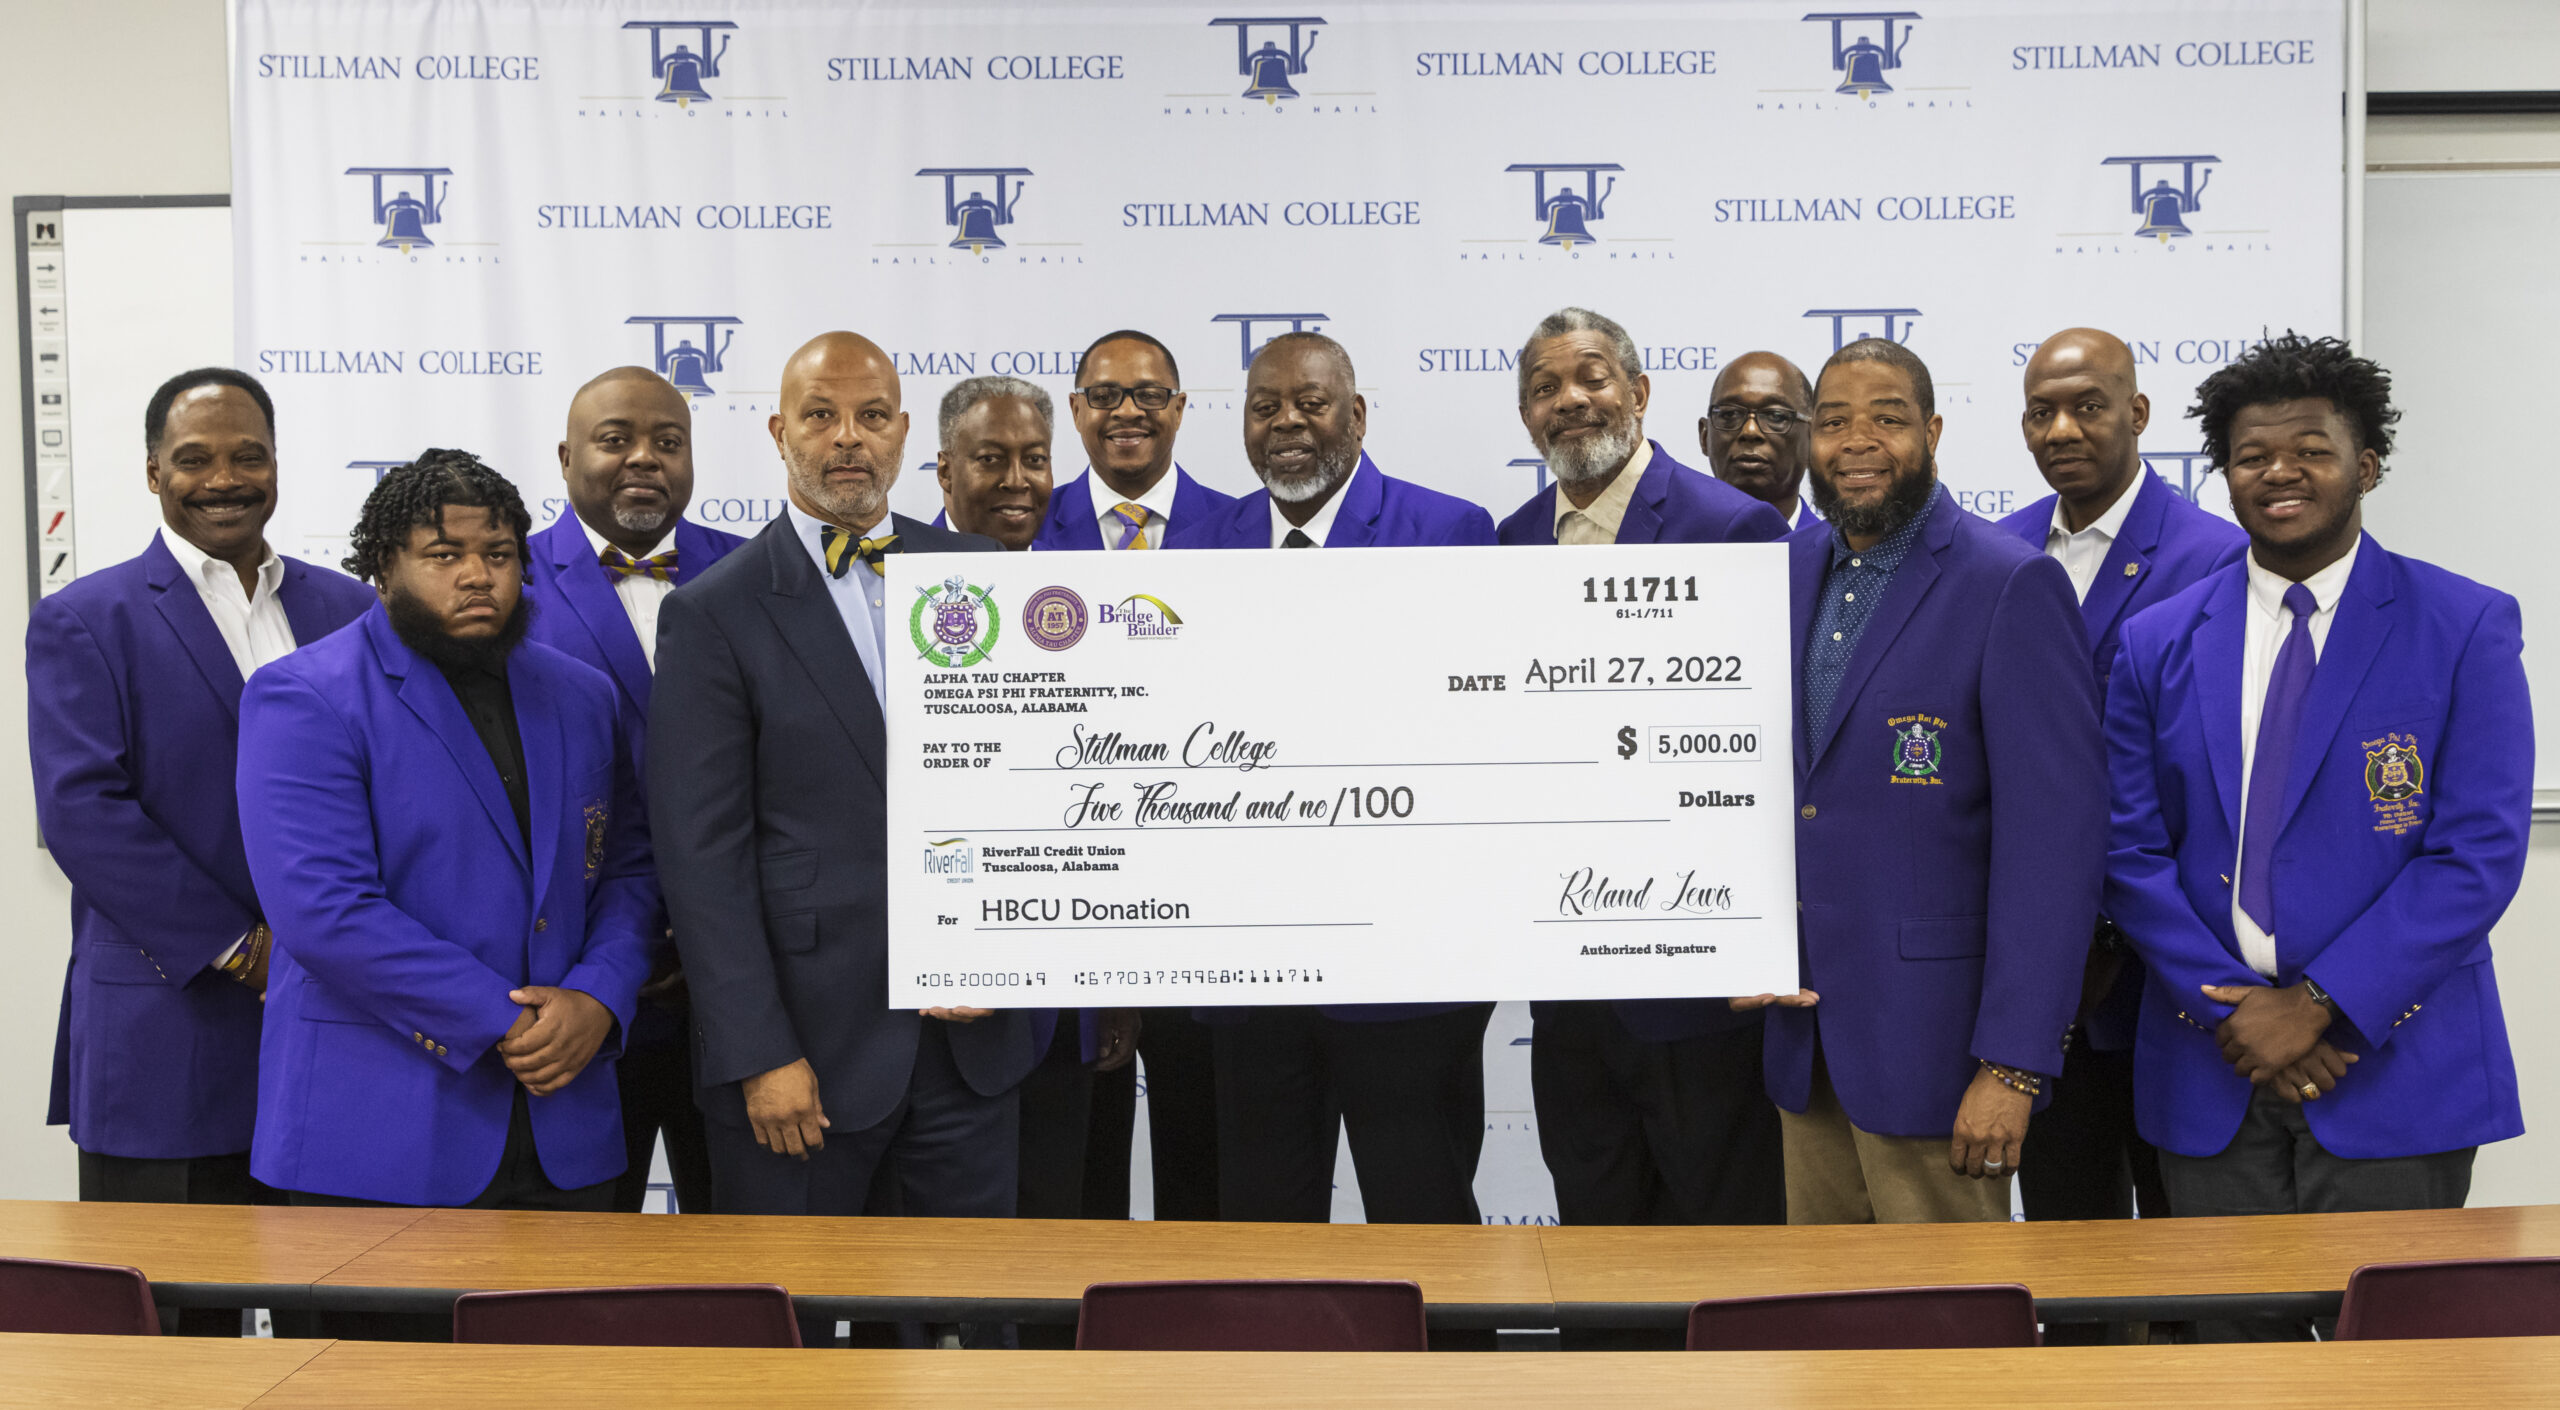 A group of black men pose for a photo while holding an oversized check